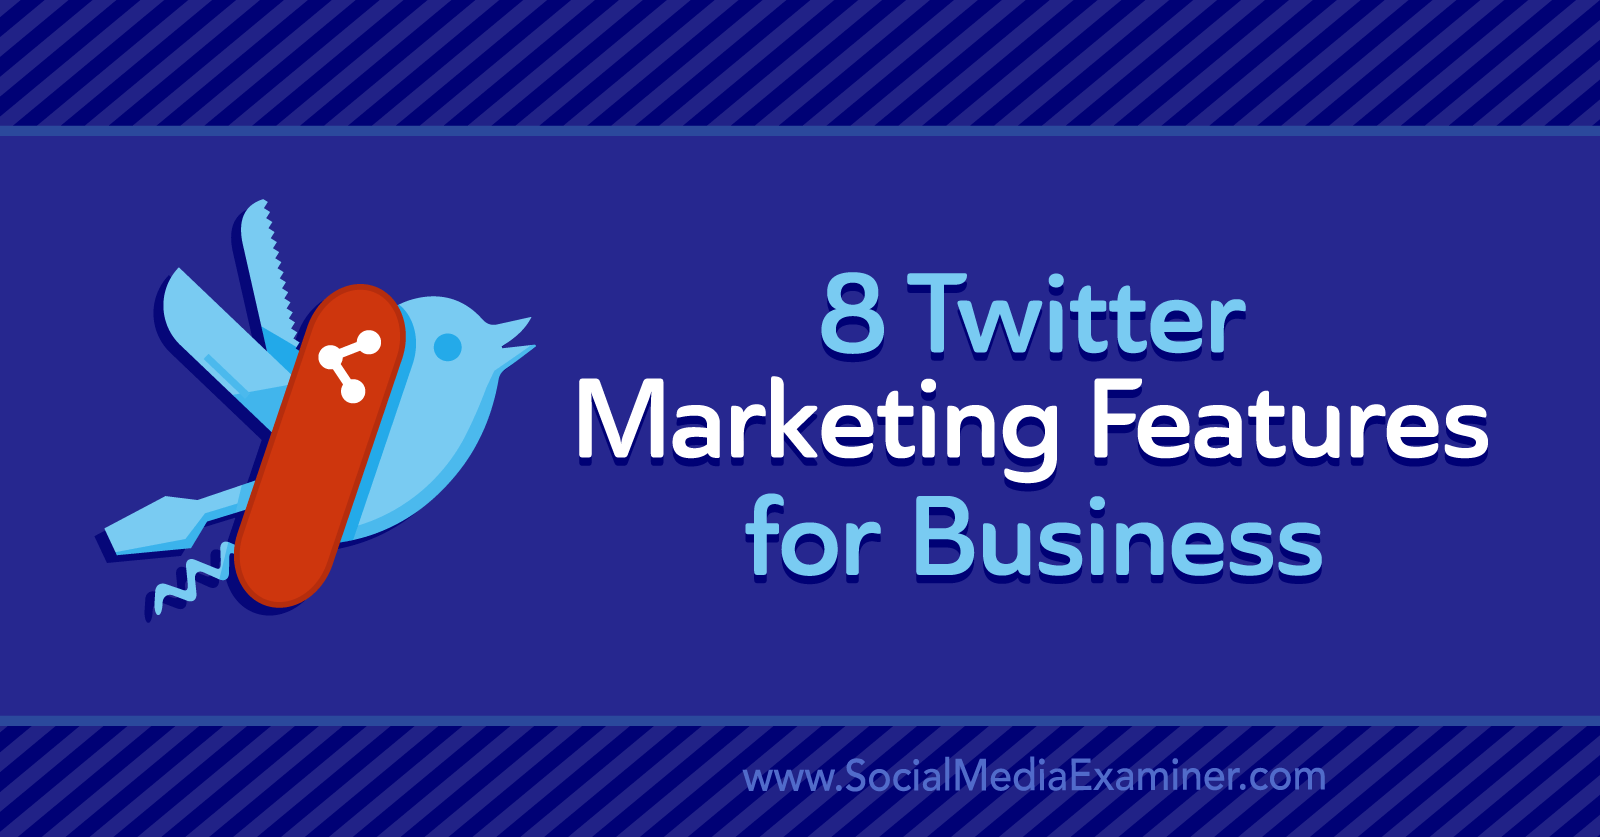 8 Twitter Marketing Features for Business by Anna Sonnenberg